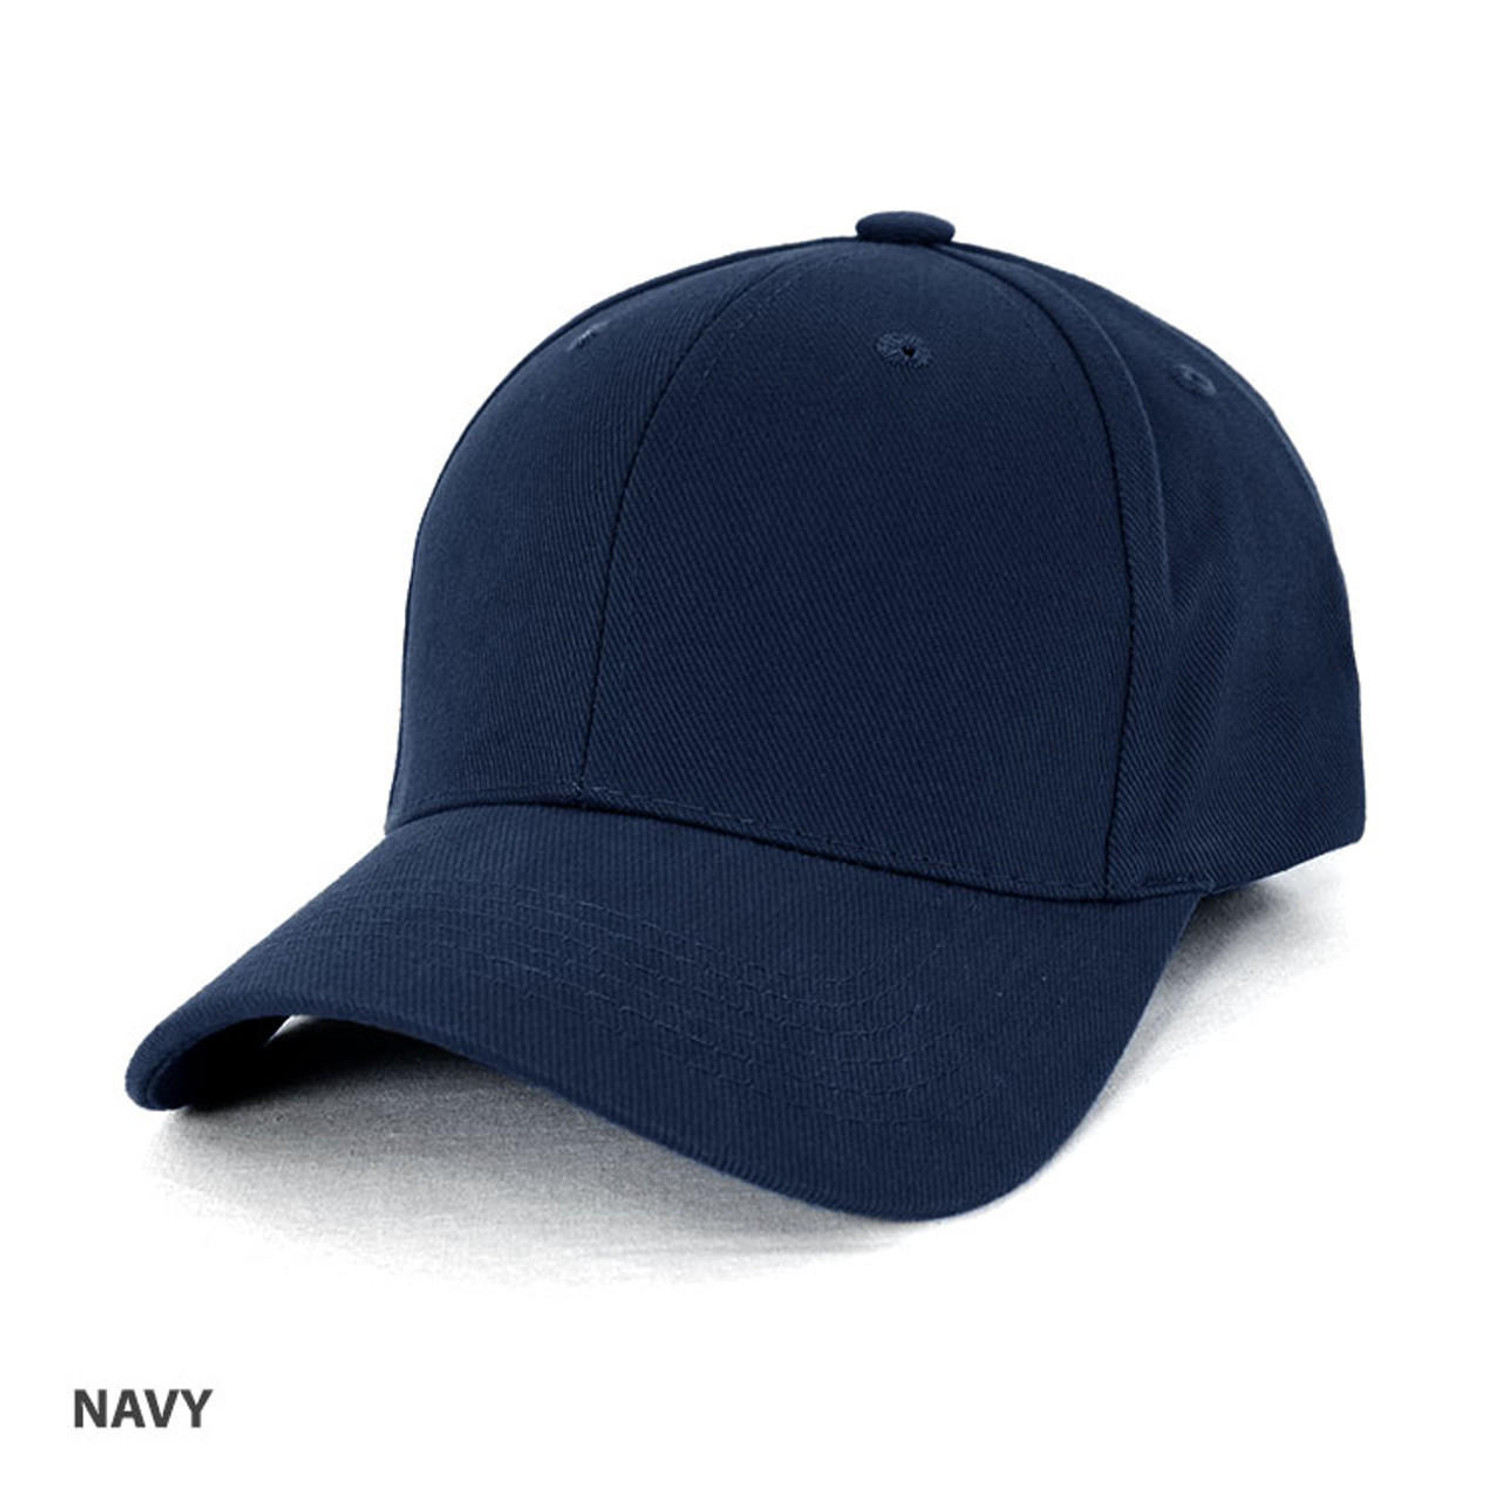  FREE EMBROIDERY - Heavy Brushed Cotton Cap in Navy (Buy 20+) 